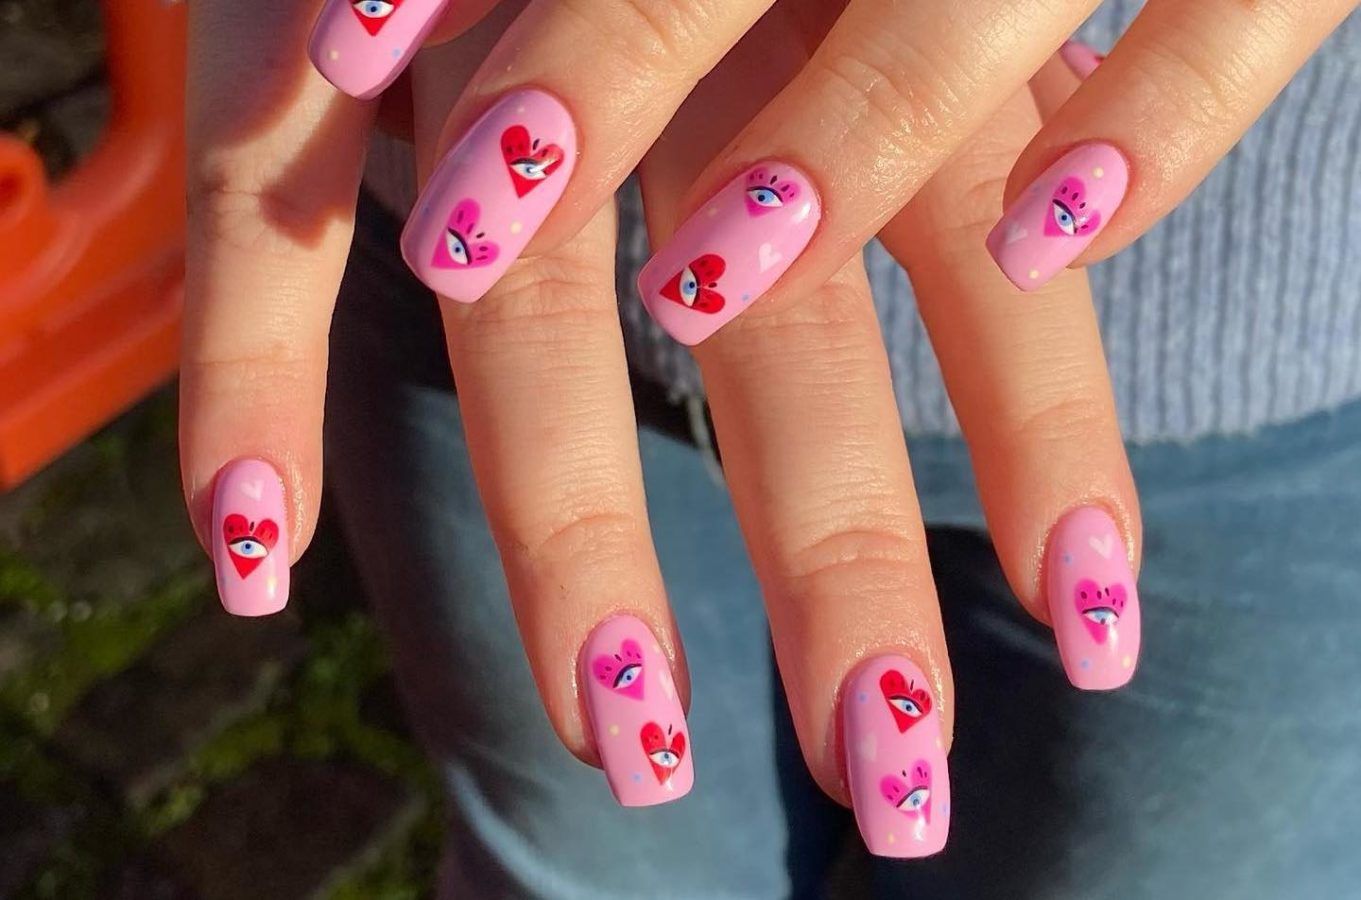 10 nail art ideas for Chinese New Year and Valentine’s Day